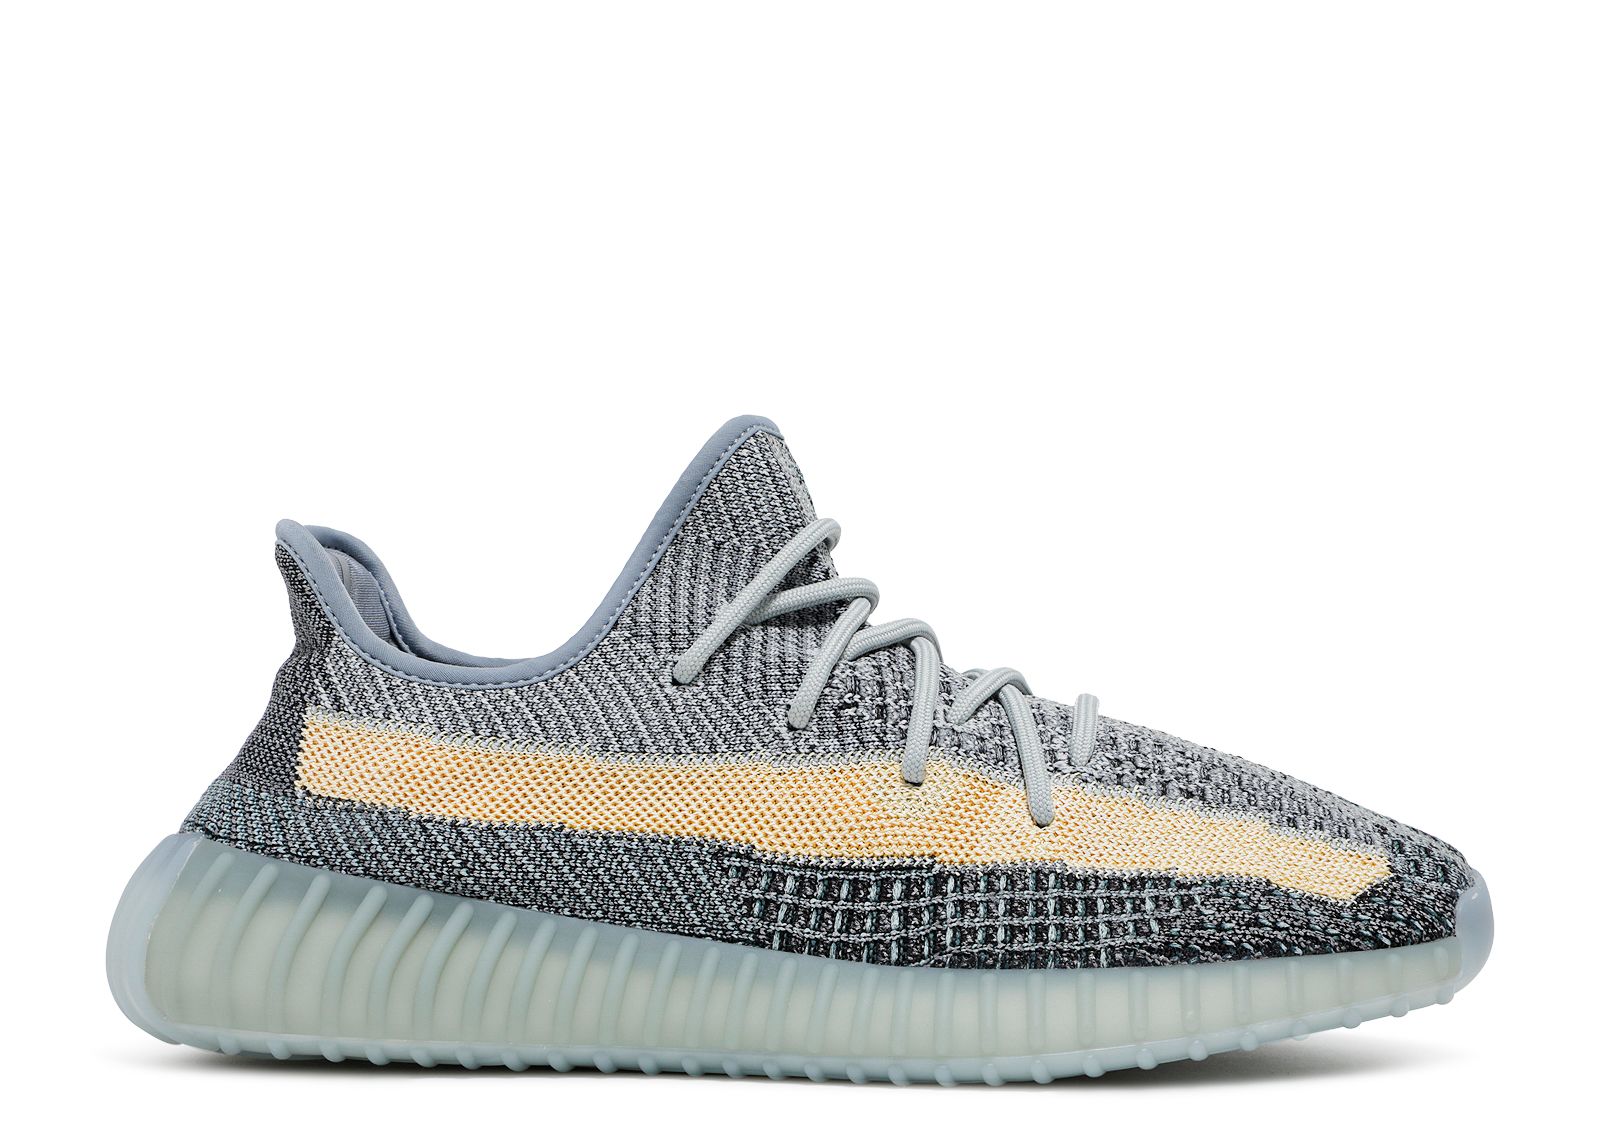 yeezy boost 350 where to buy online